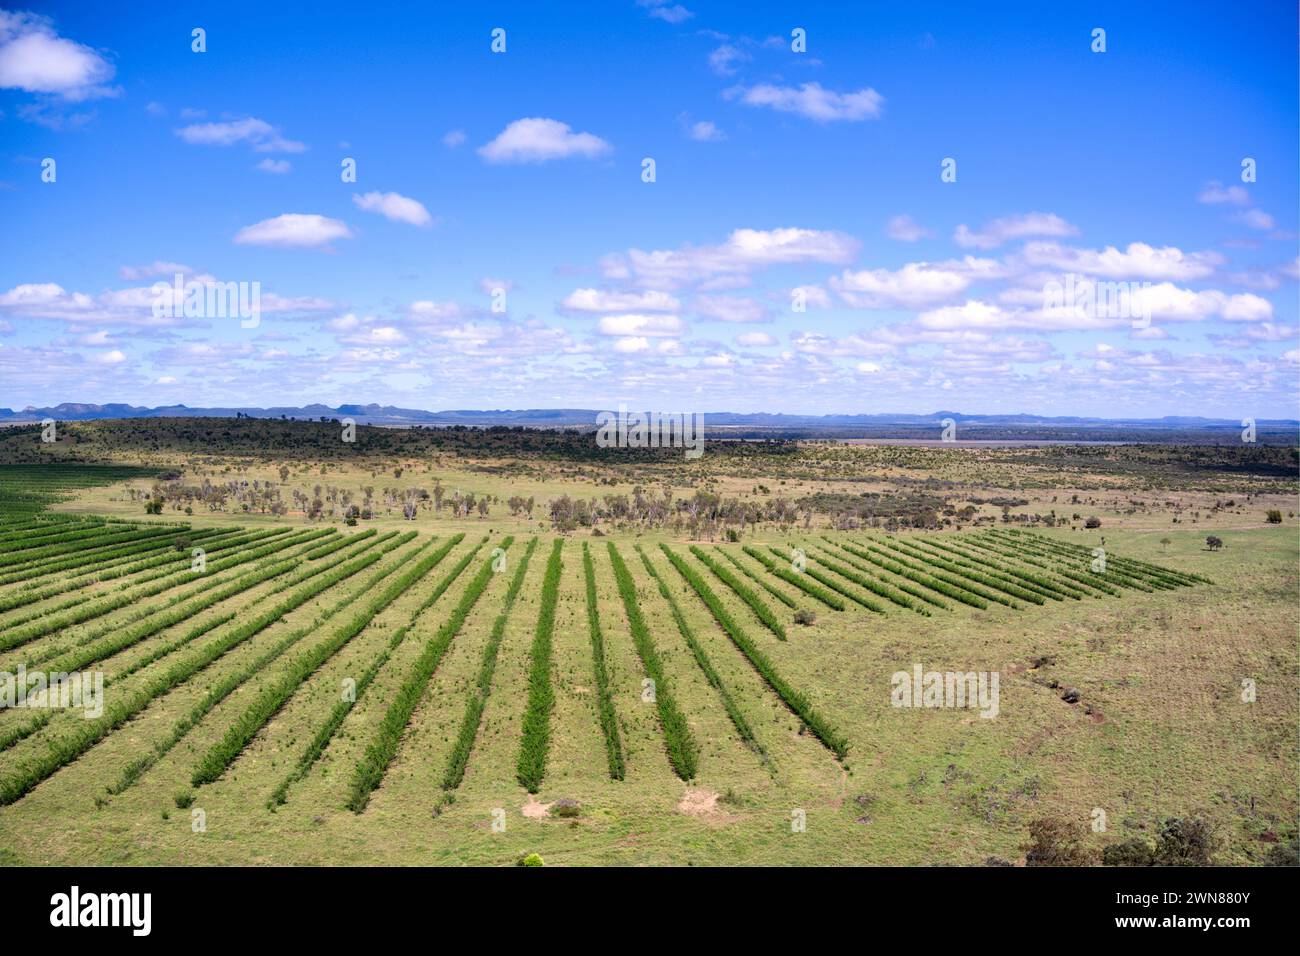 Vertical farming practices on irrigation farmland from the Dawson River for cattle grazing near Cracow Queensland Australia Stock Photo